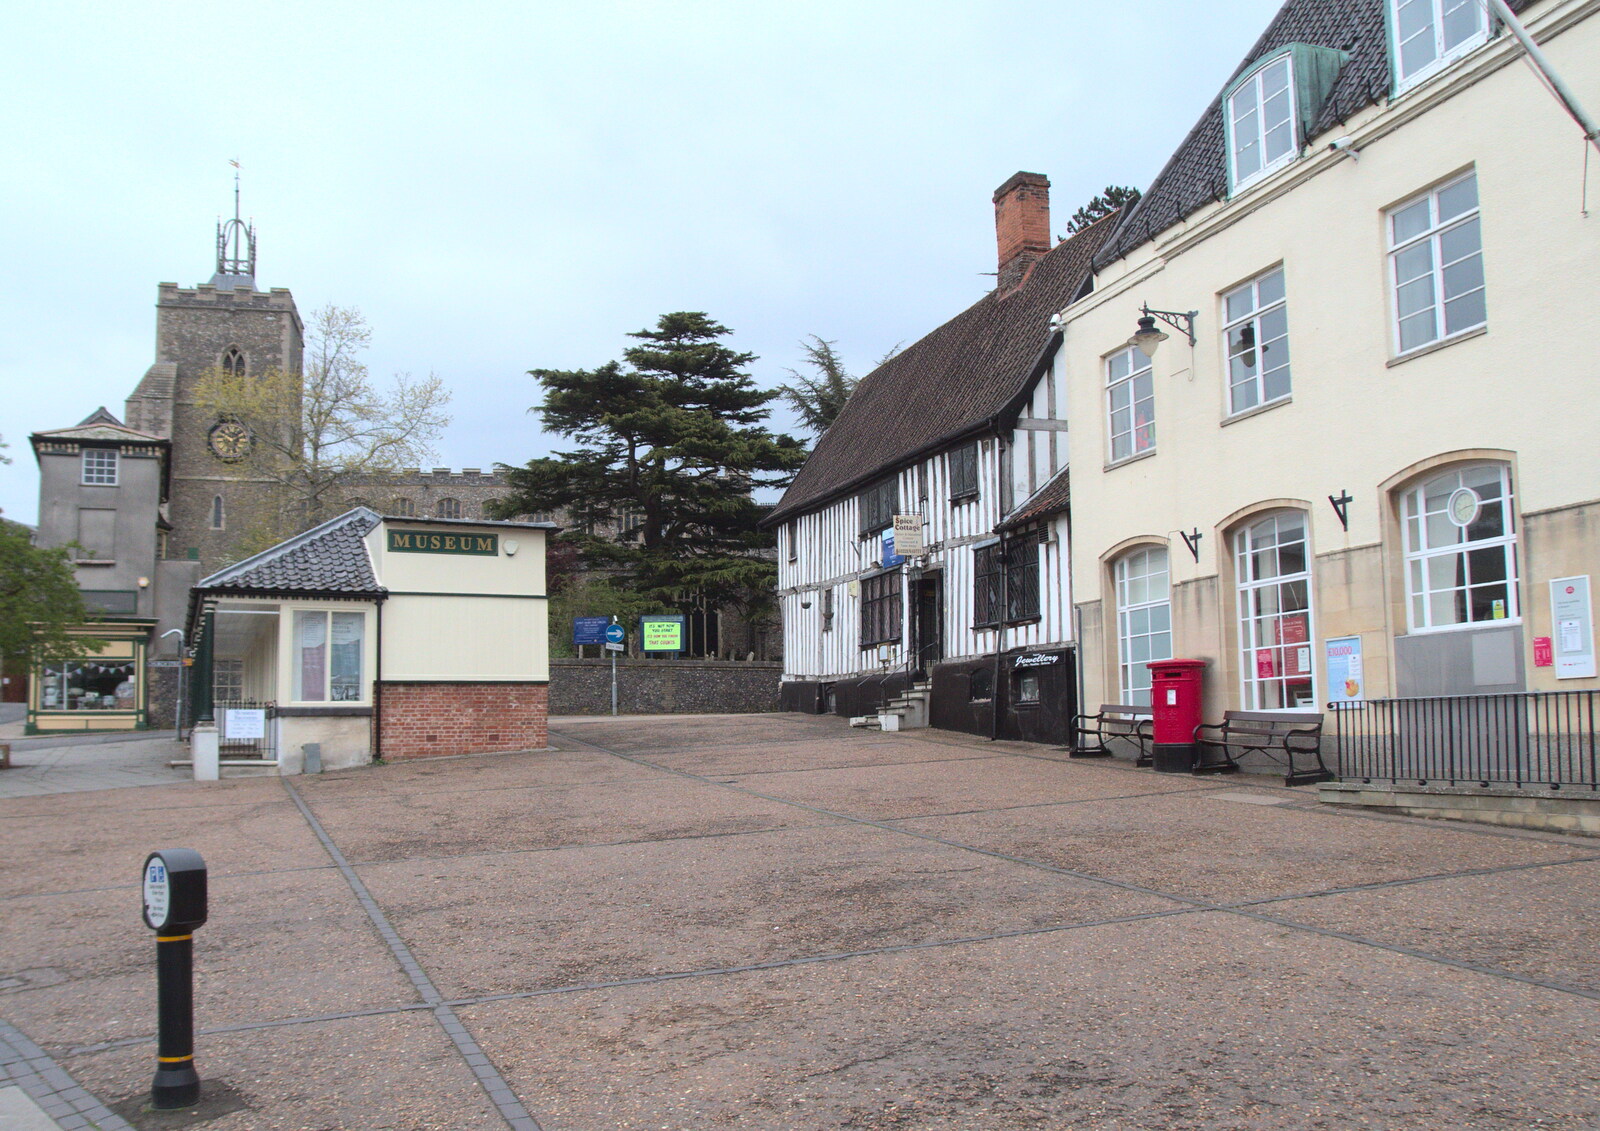 The Market Place from The Lockdown Desertion of Diss, and a Bike Ride up the Avenue, Brome - 19th April 2020